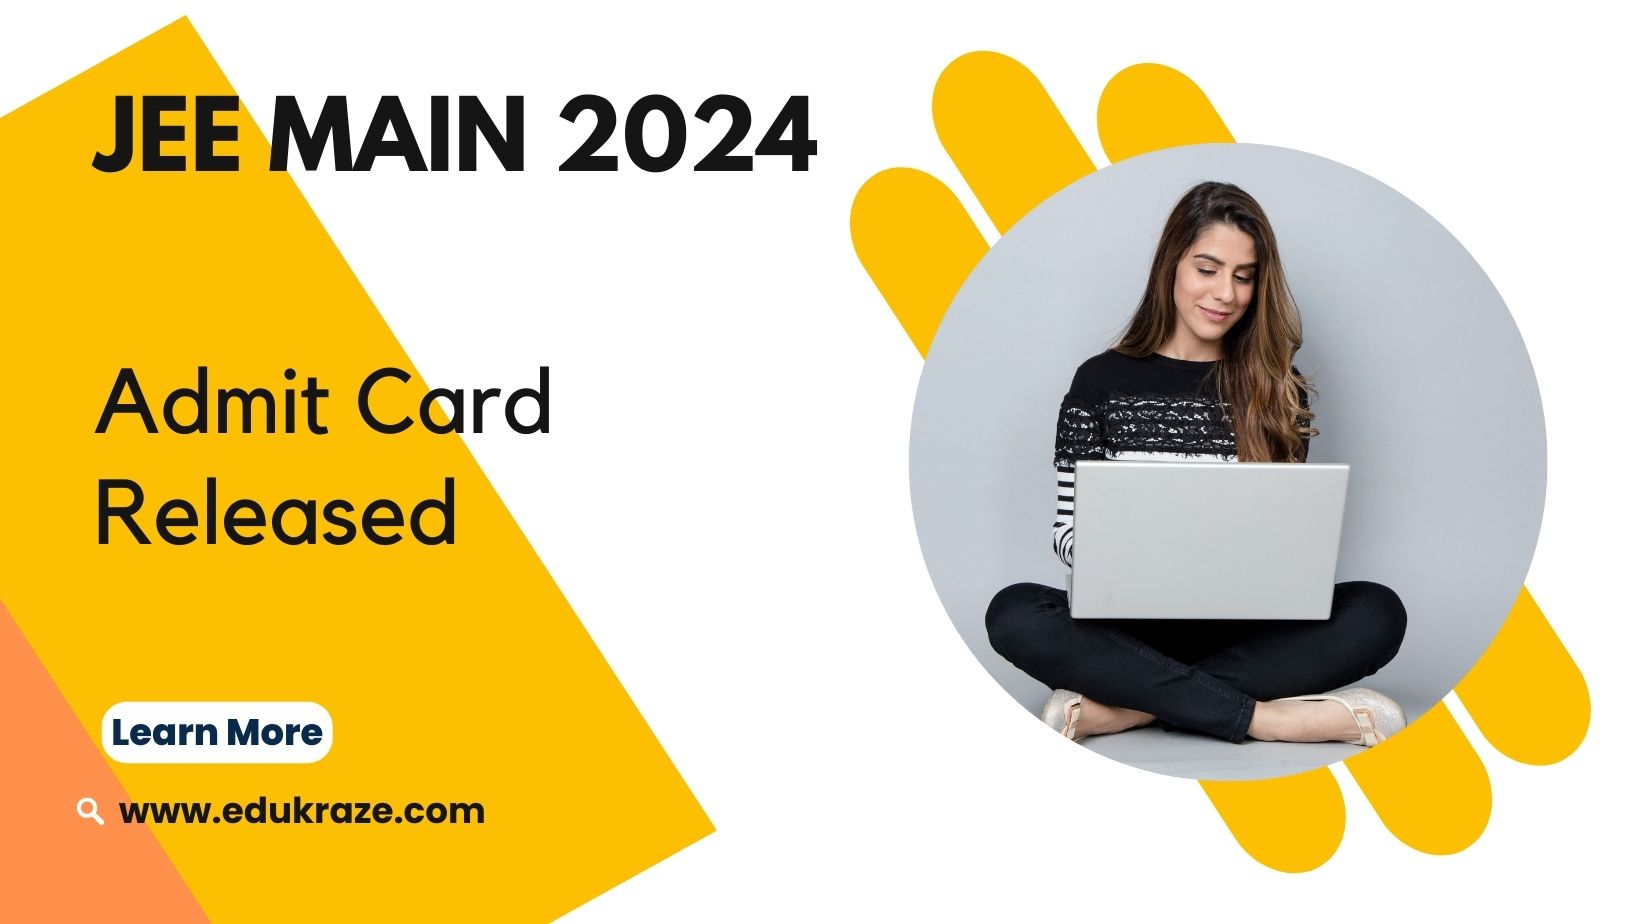 JEE Main 2024 Admit Card Released: Here's How to Download